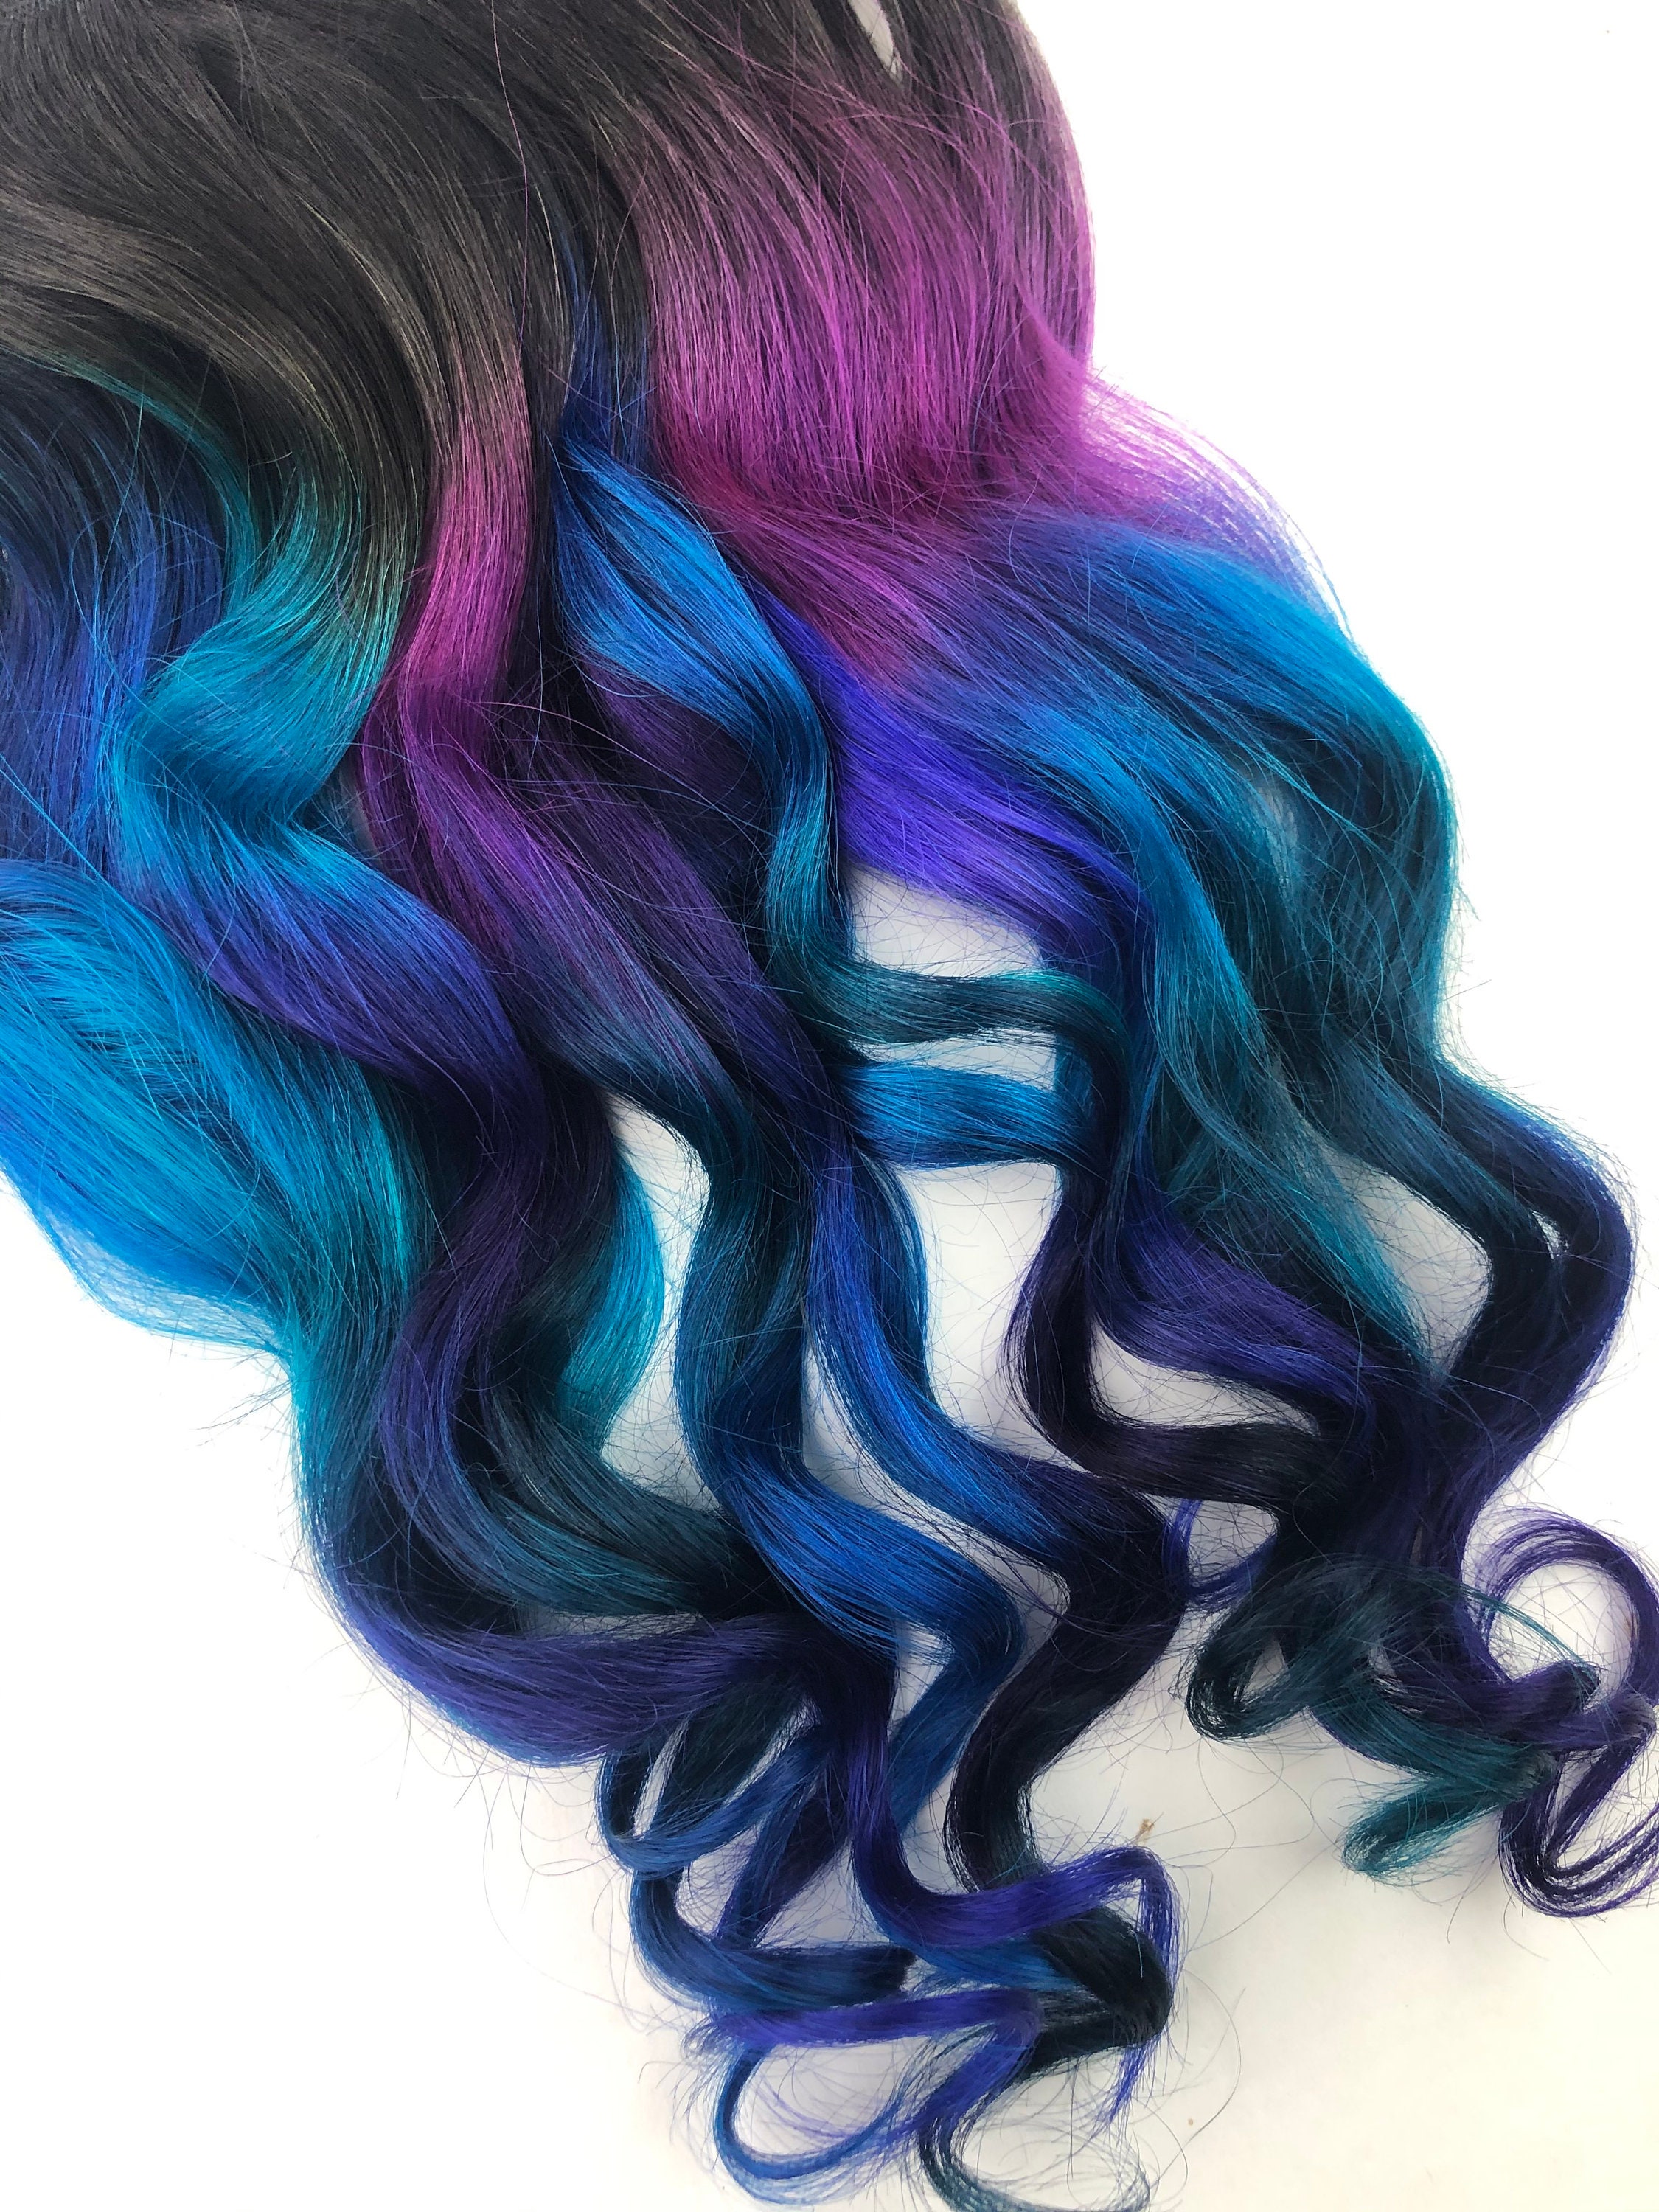 Blue Purple Ombre Dark Gem Colored Hair Extensions Human - Etsy